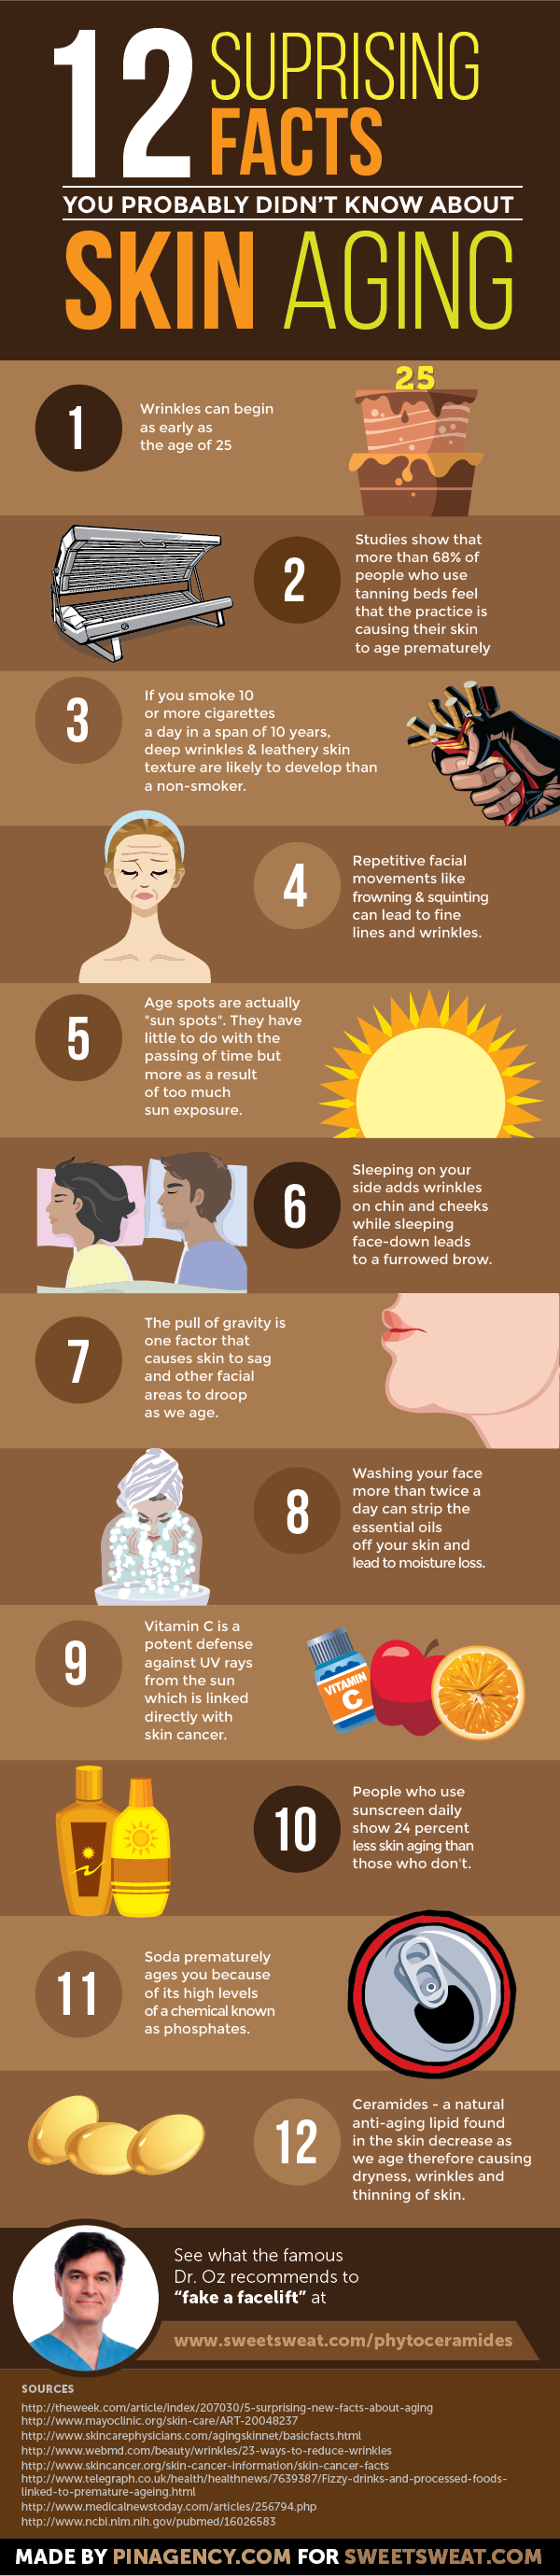 12 Surprising Facts You Probably Didn’t Know About Skin Aging